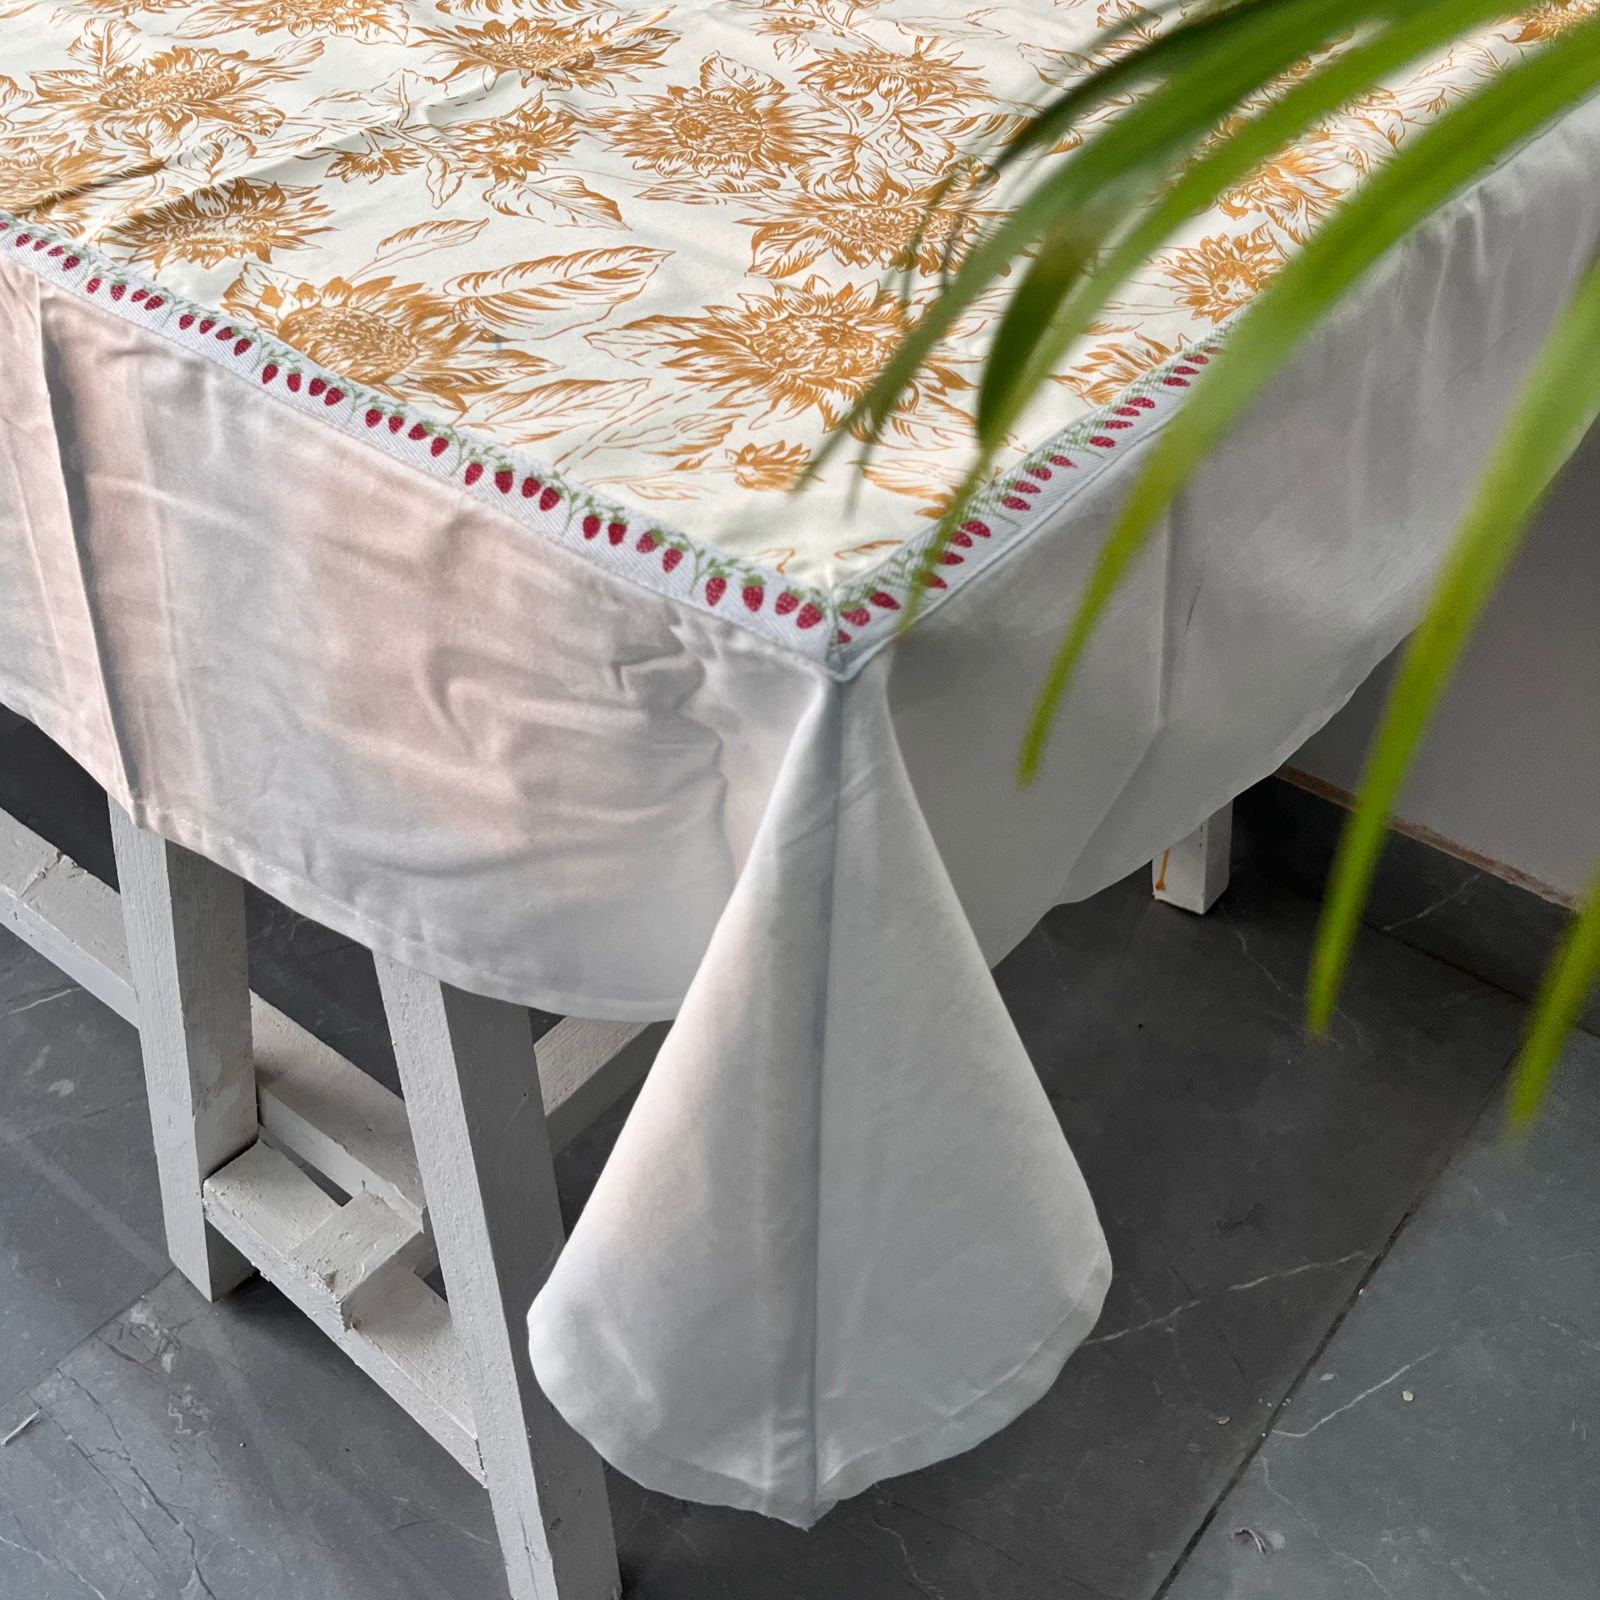 Dining Sheet with size of 152cm x 228cm (60" x 90")